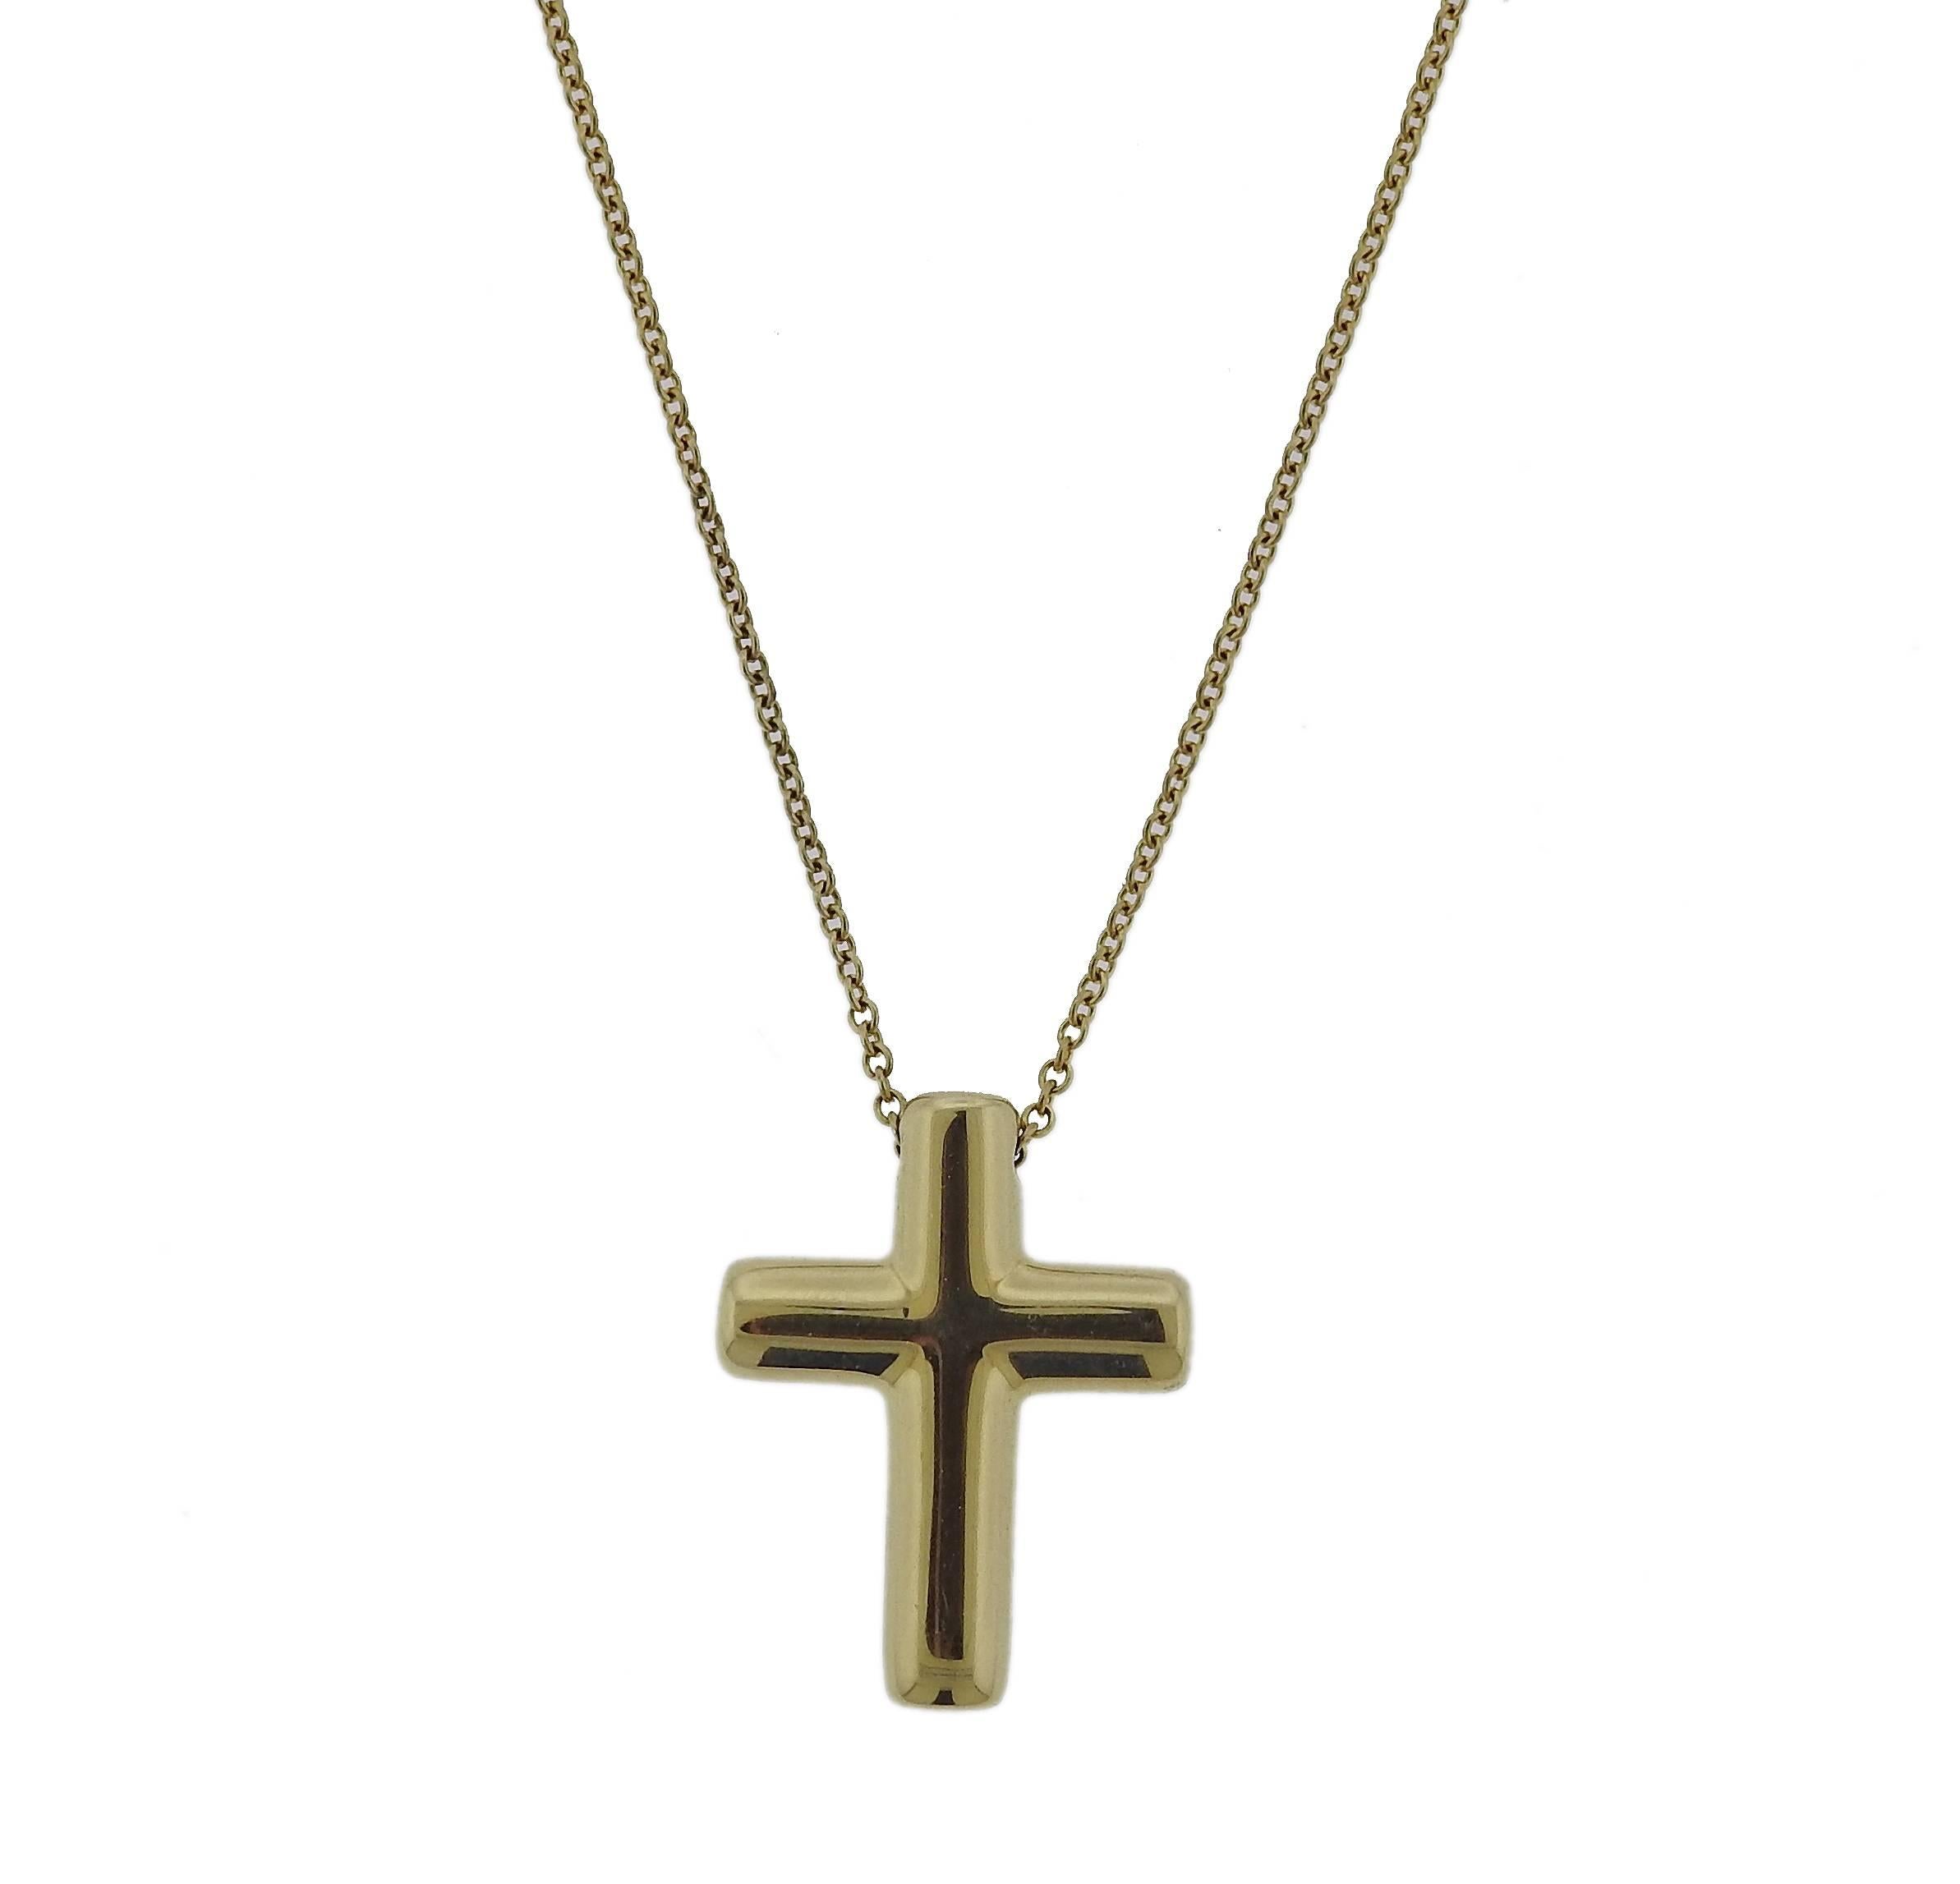 An 18k yellow gold cross pendant necklace crafted by Tiffany & Co for the Etoile collection. Features approximately 0.08ctw of G/VS diamonds. Necklace measures 16 1/4" long, pendant - 20mm x 15mm. Weight is 4.8 grams. 